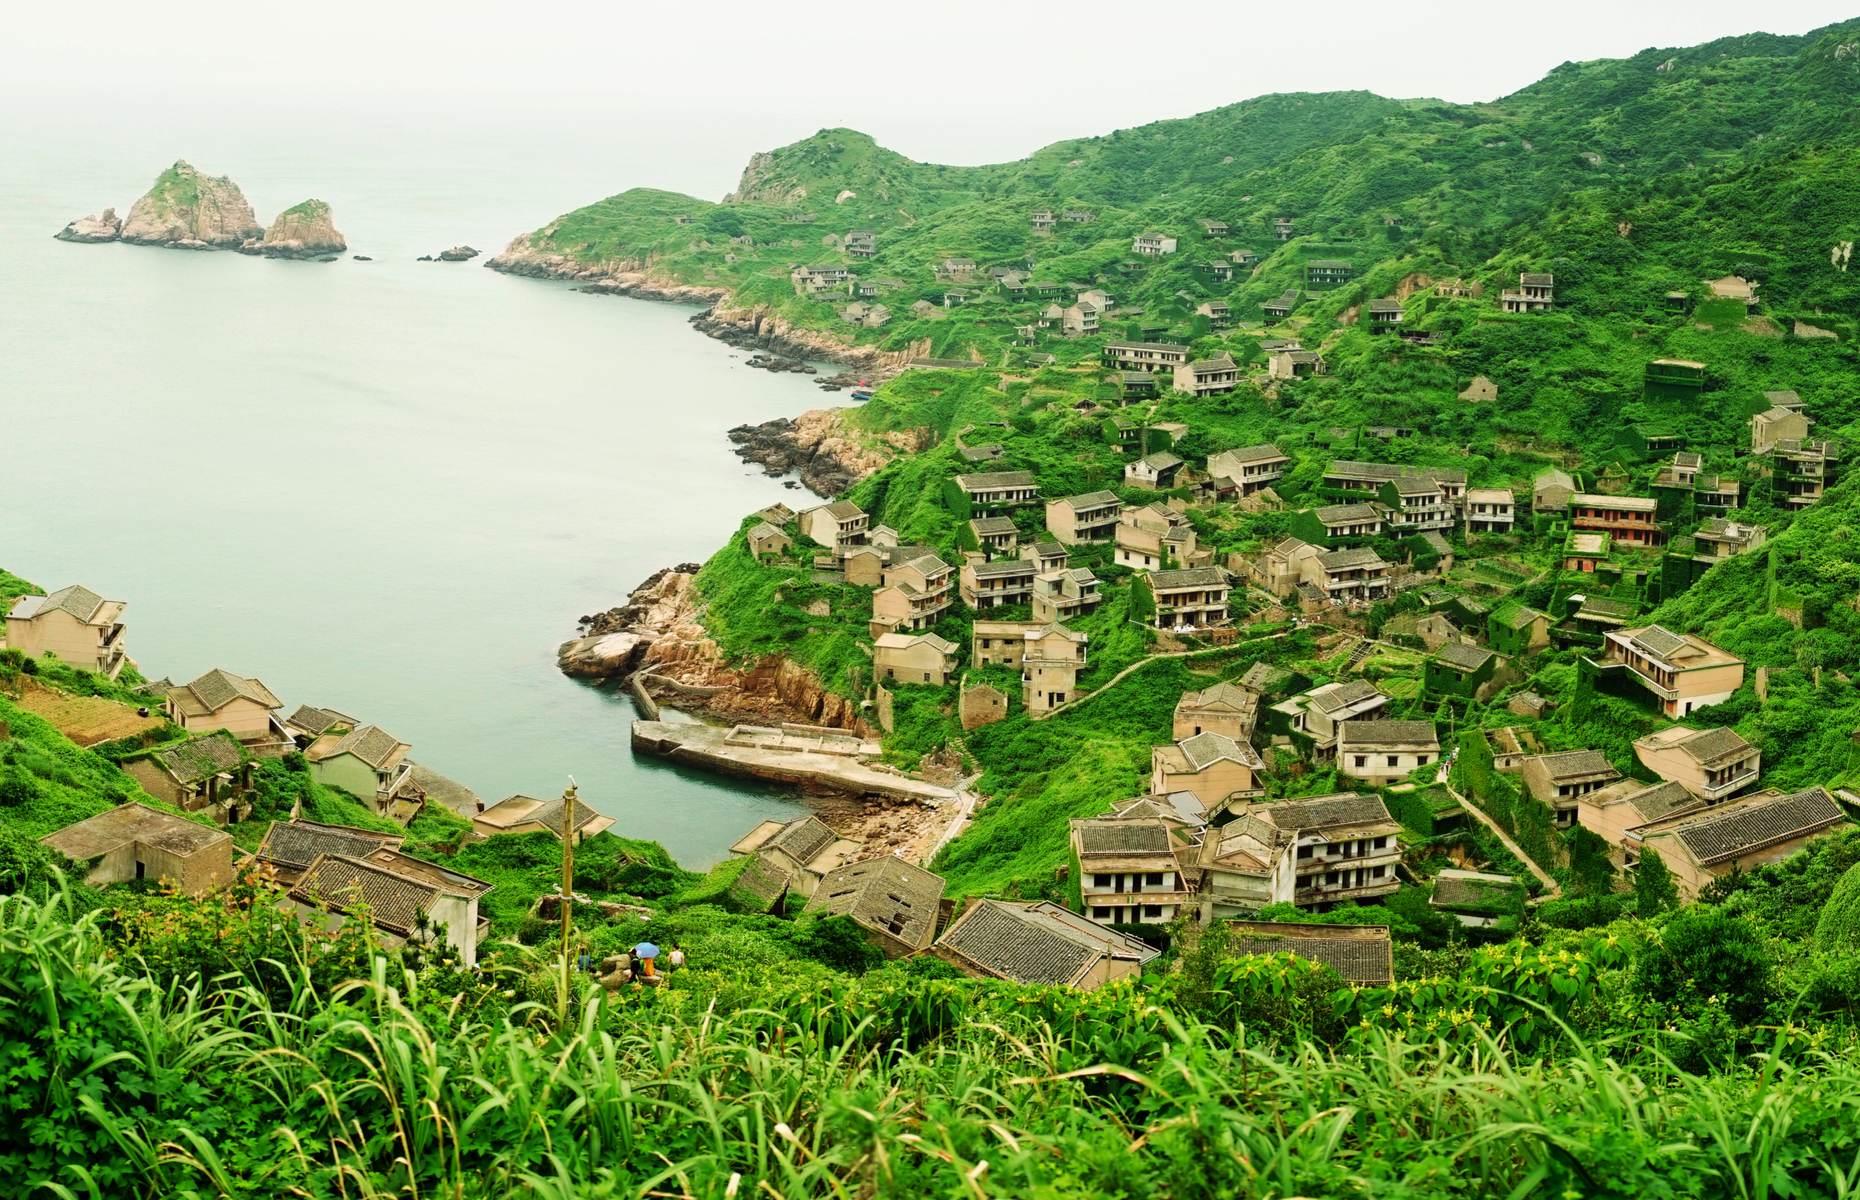 All but abandoned in the 1990s, the remote fishing village of Houtouwan, located on Shengshan Island off the east coast of China, has since become overgrown with ivy and foliage. With its intriguing green-carpeted buildings blending into the hillsides, it almost looks as if it’s been swallowed up by the land. While Houtouwan is largely deserted, a small number of its former population remains, making an income from intrepid tourists who come to visit.